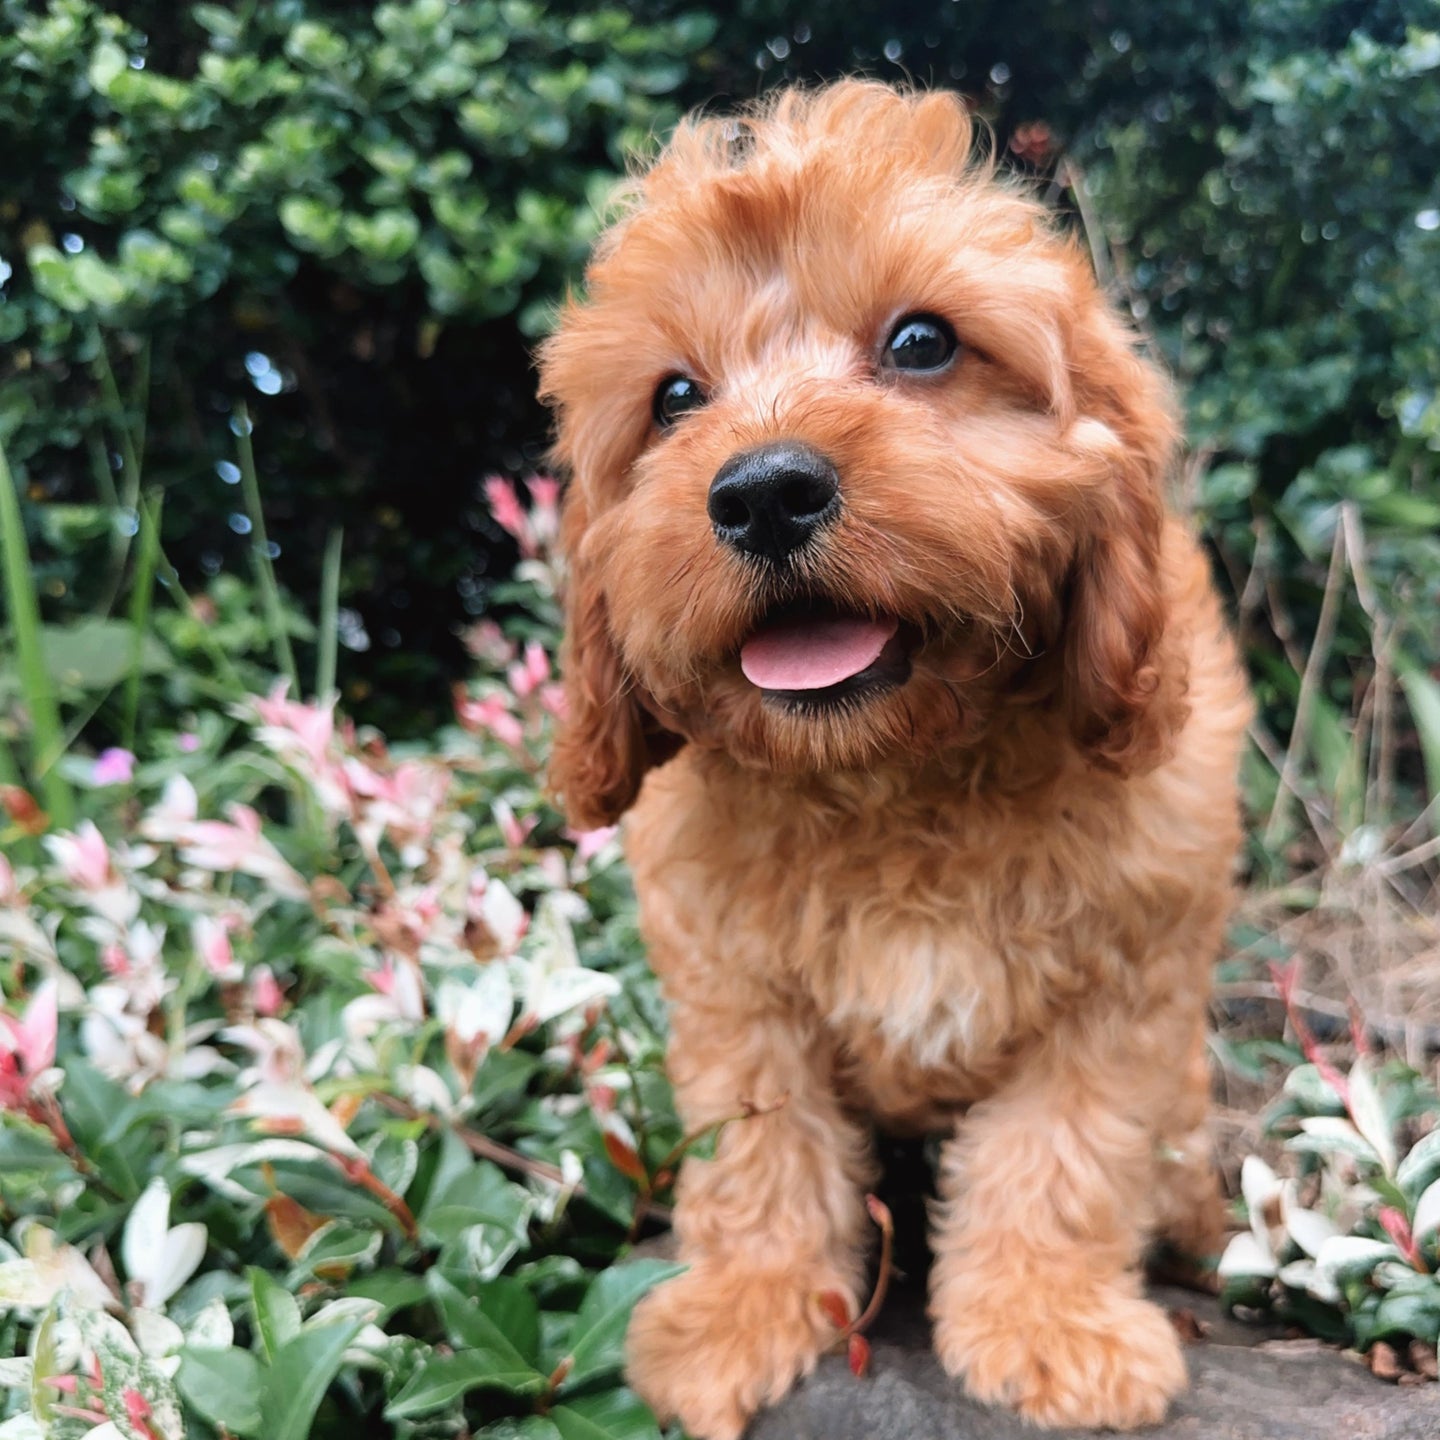 .PRINCE - Male Toy Cavoodle - Ready Now